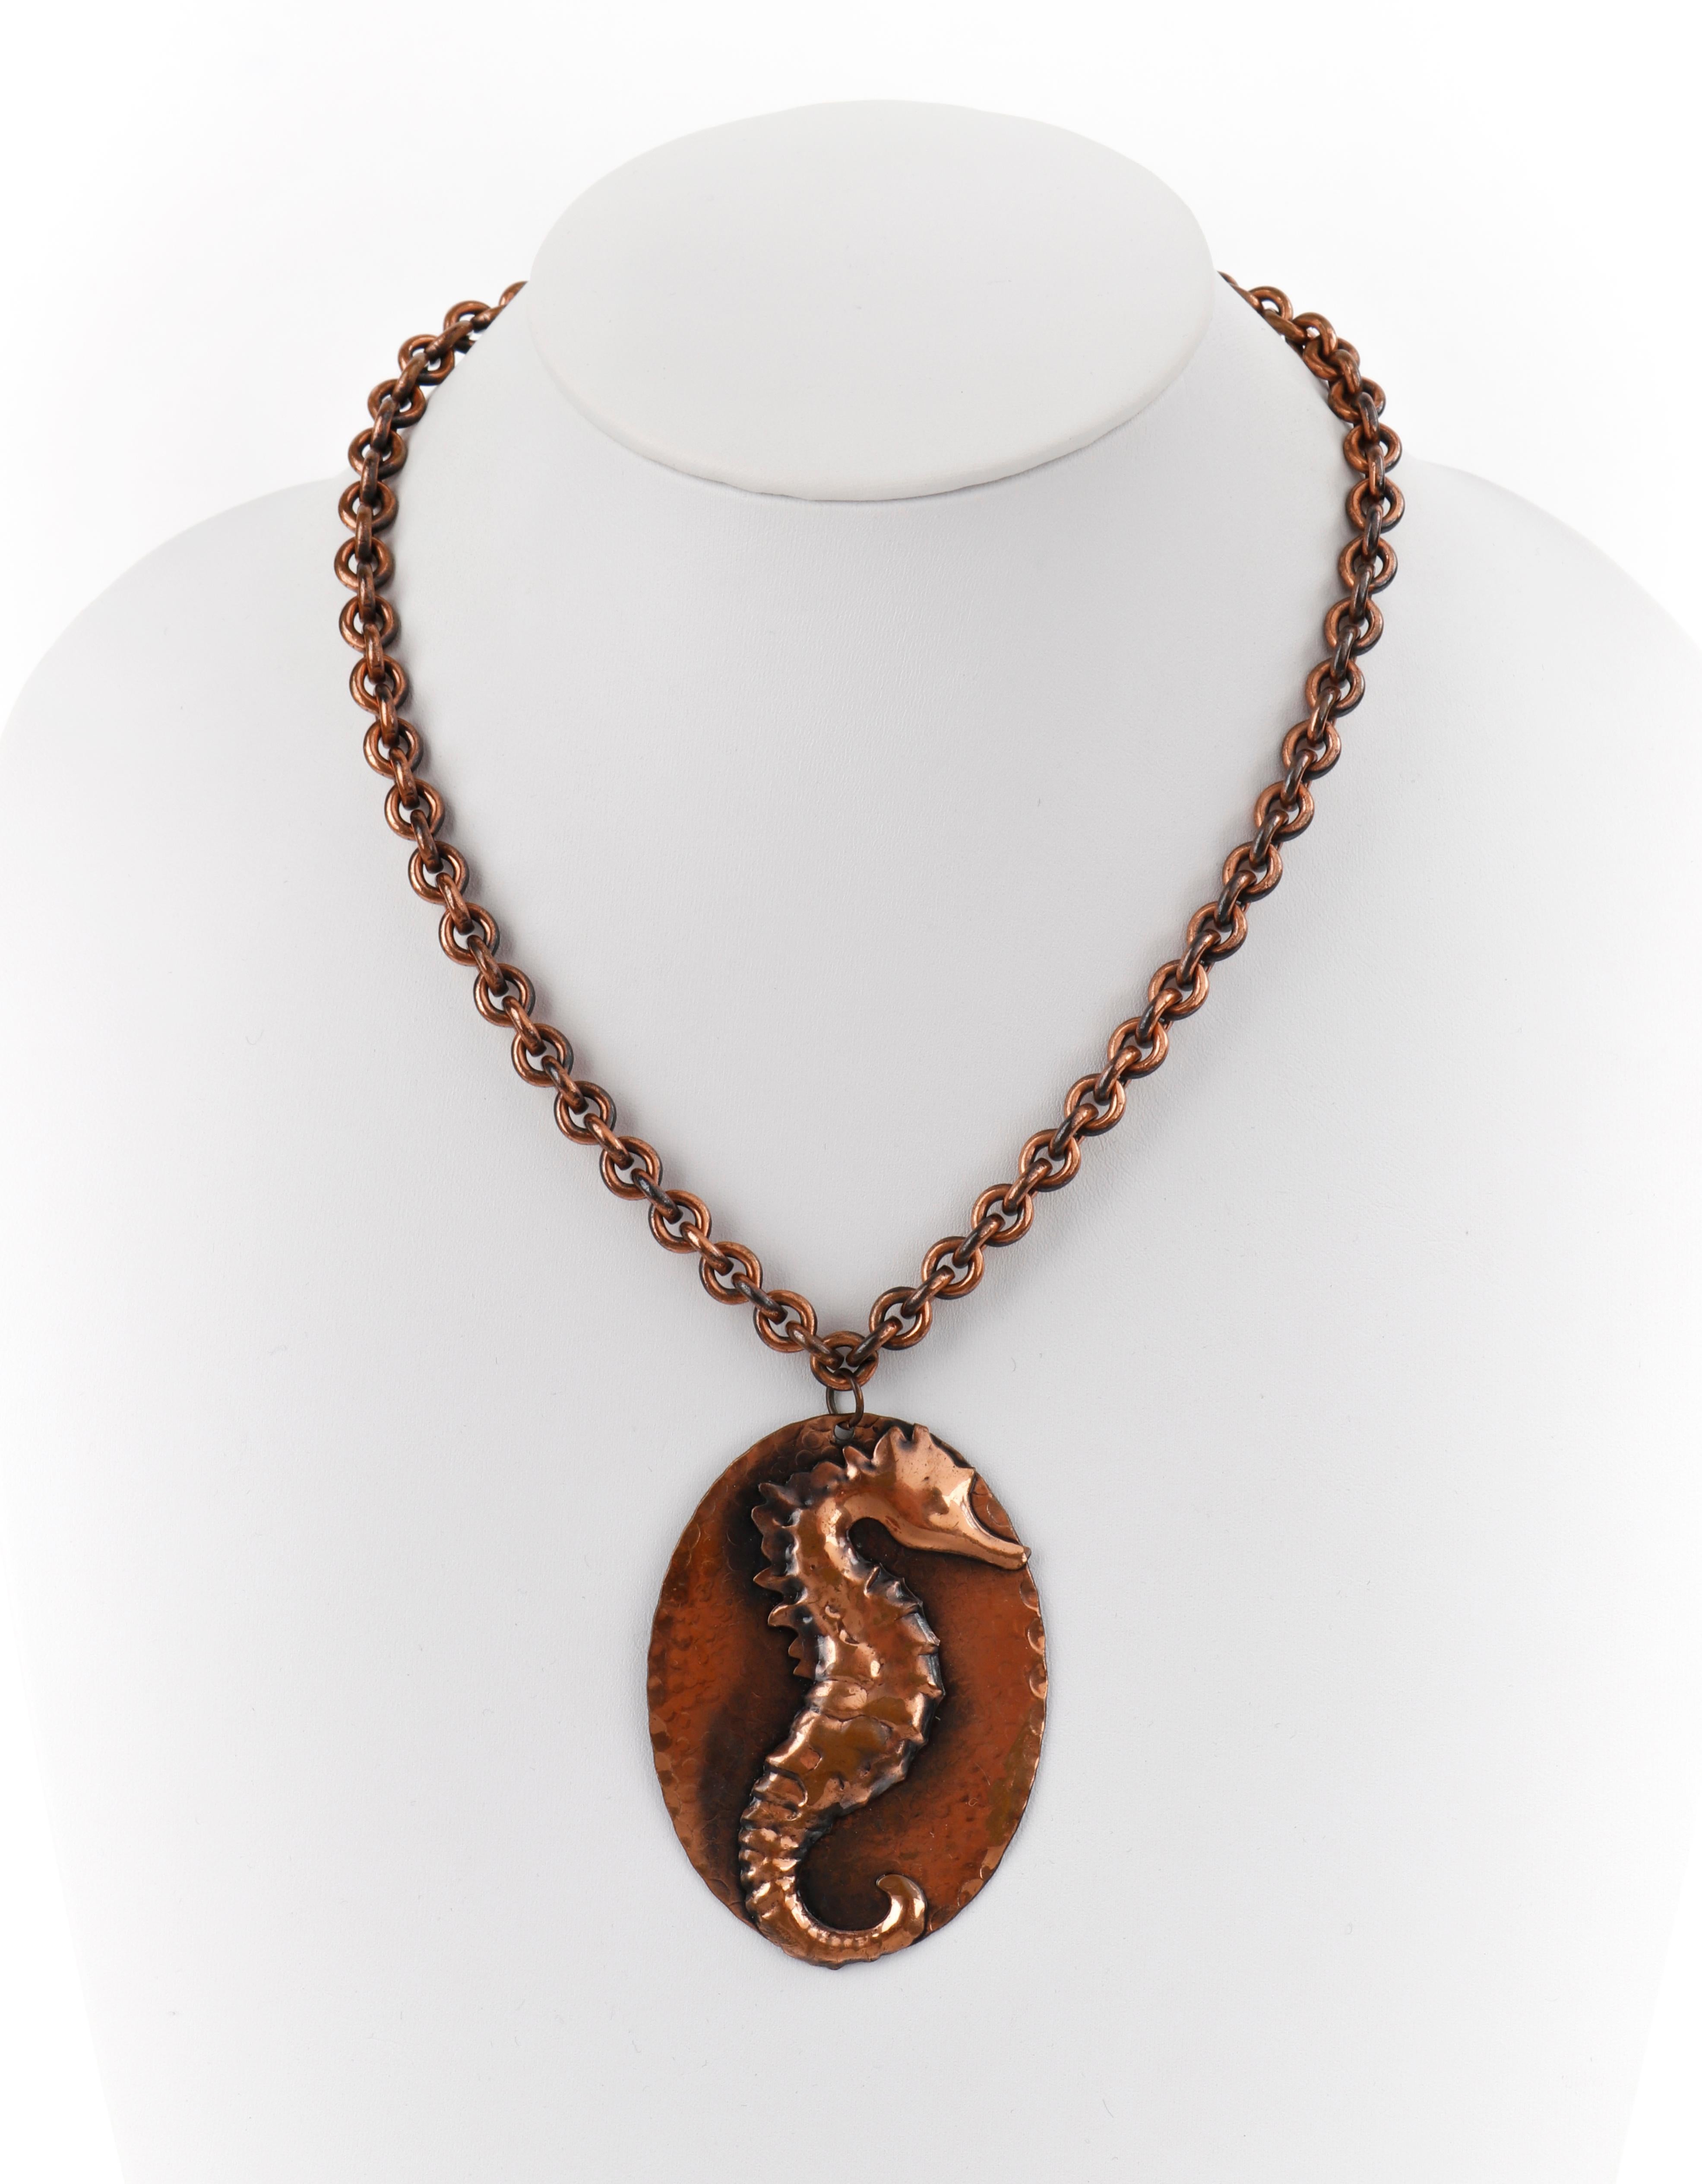 Genuine Copper Handcrafted Seahorse Necklace Bracelet Earring Parure Set
 
Style: Pendant necklace; cuff bracelet; post back earrings
Color(s): Copper
Marked Material: “Genuine Copper” hallmark
Additional Details / Inclusions: Genuine copper 4 piece